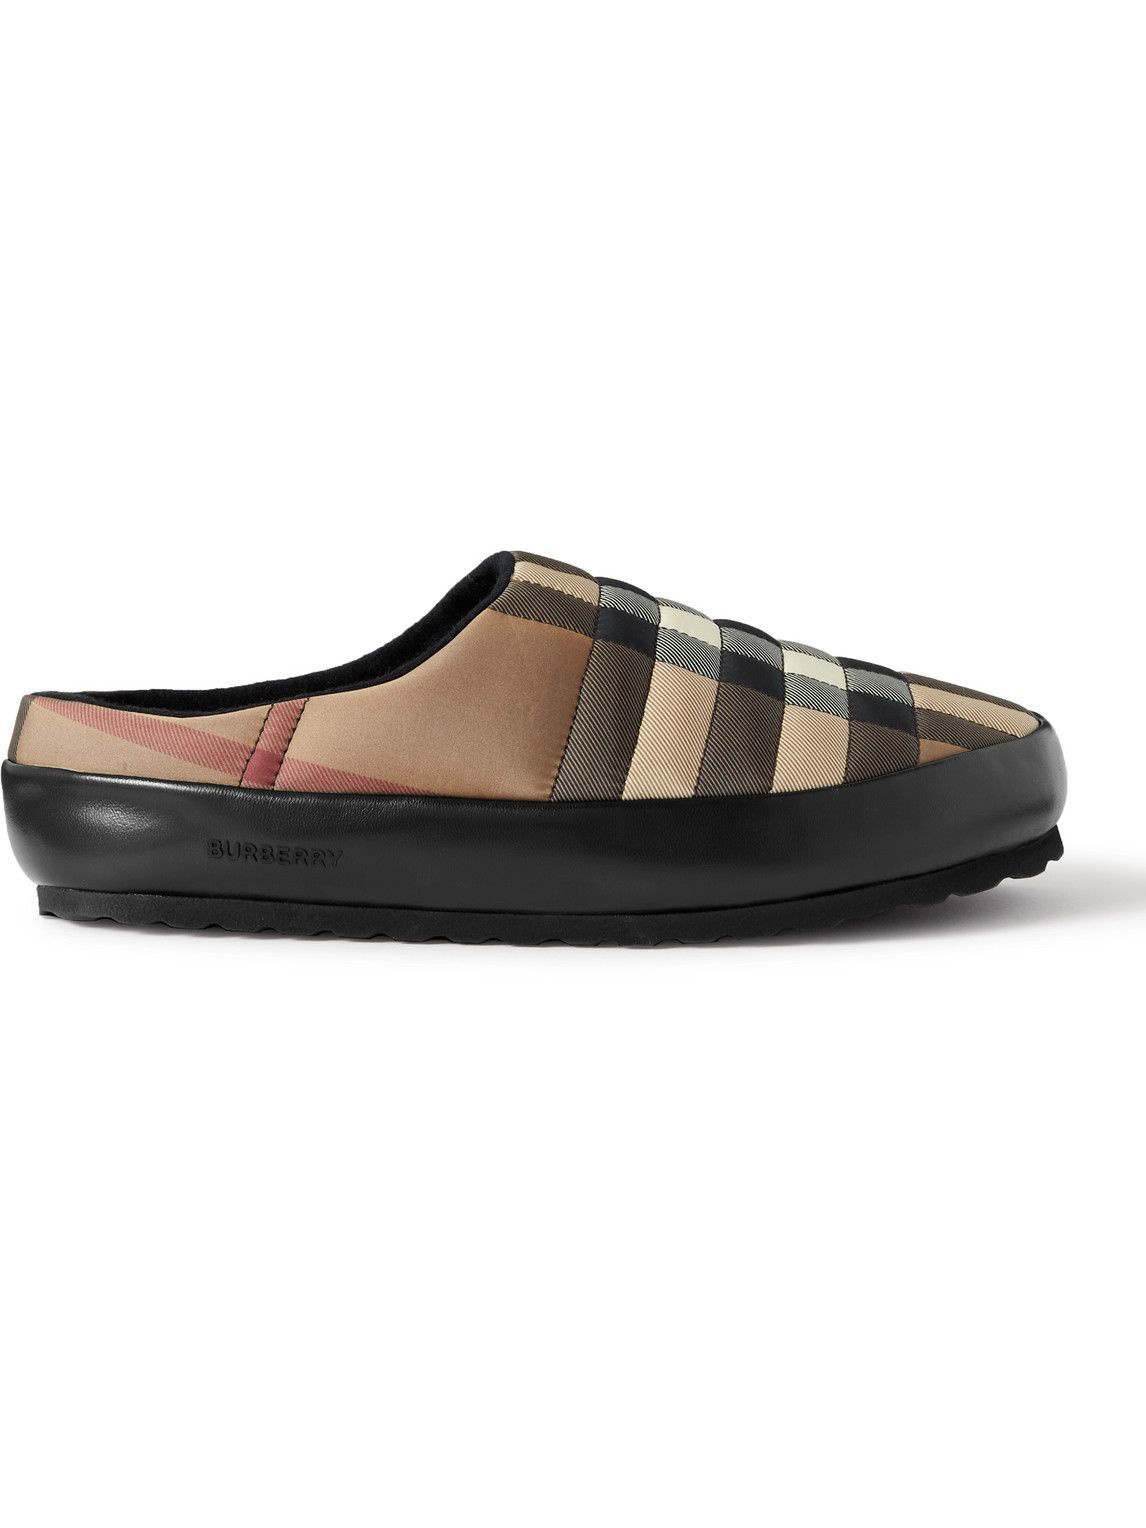 Burberry White Check Slip-On Sneakers